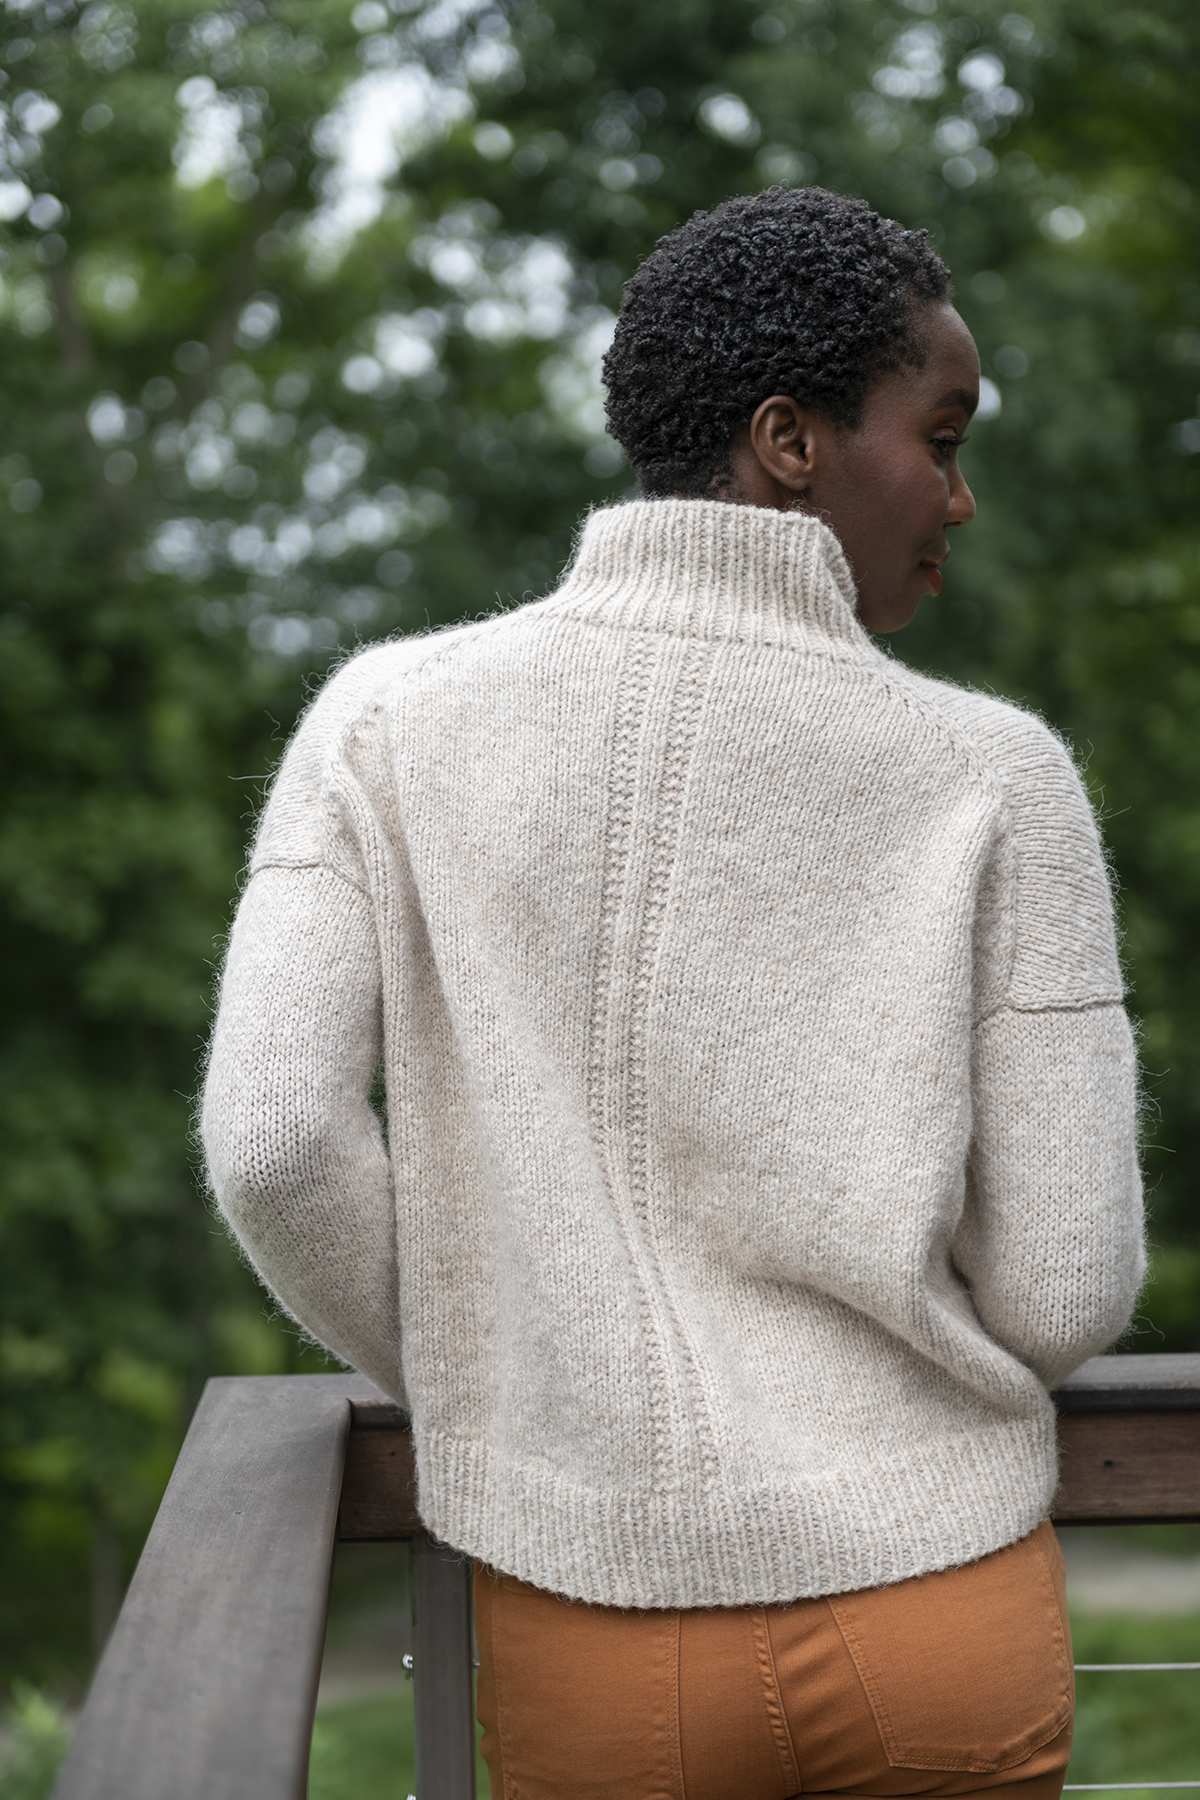 Colvin - Knitting pattern by Julie Hoover